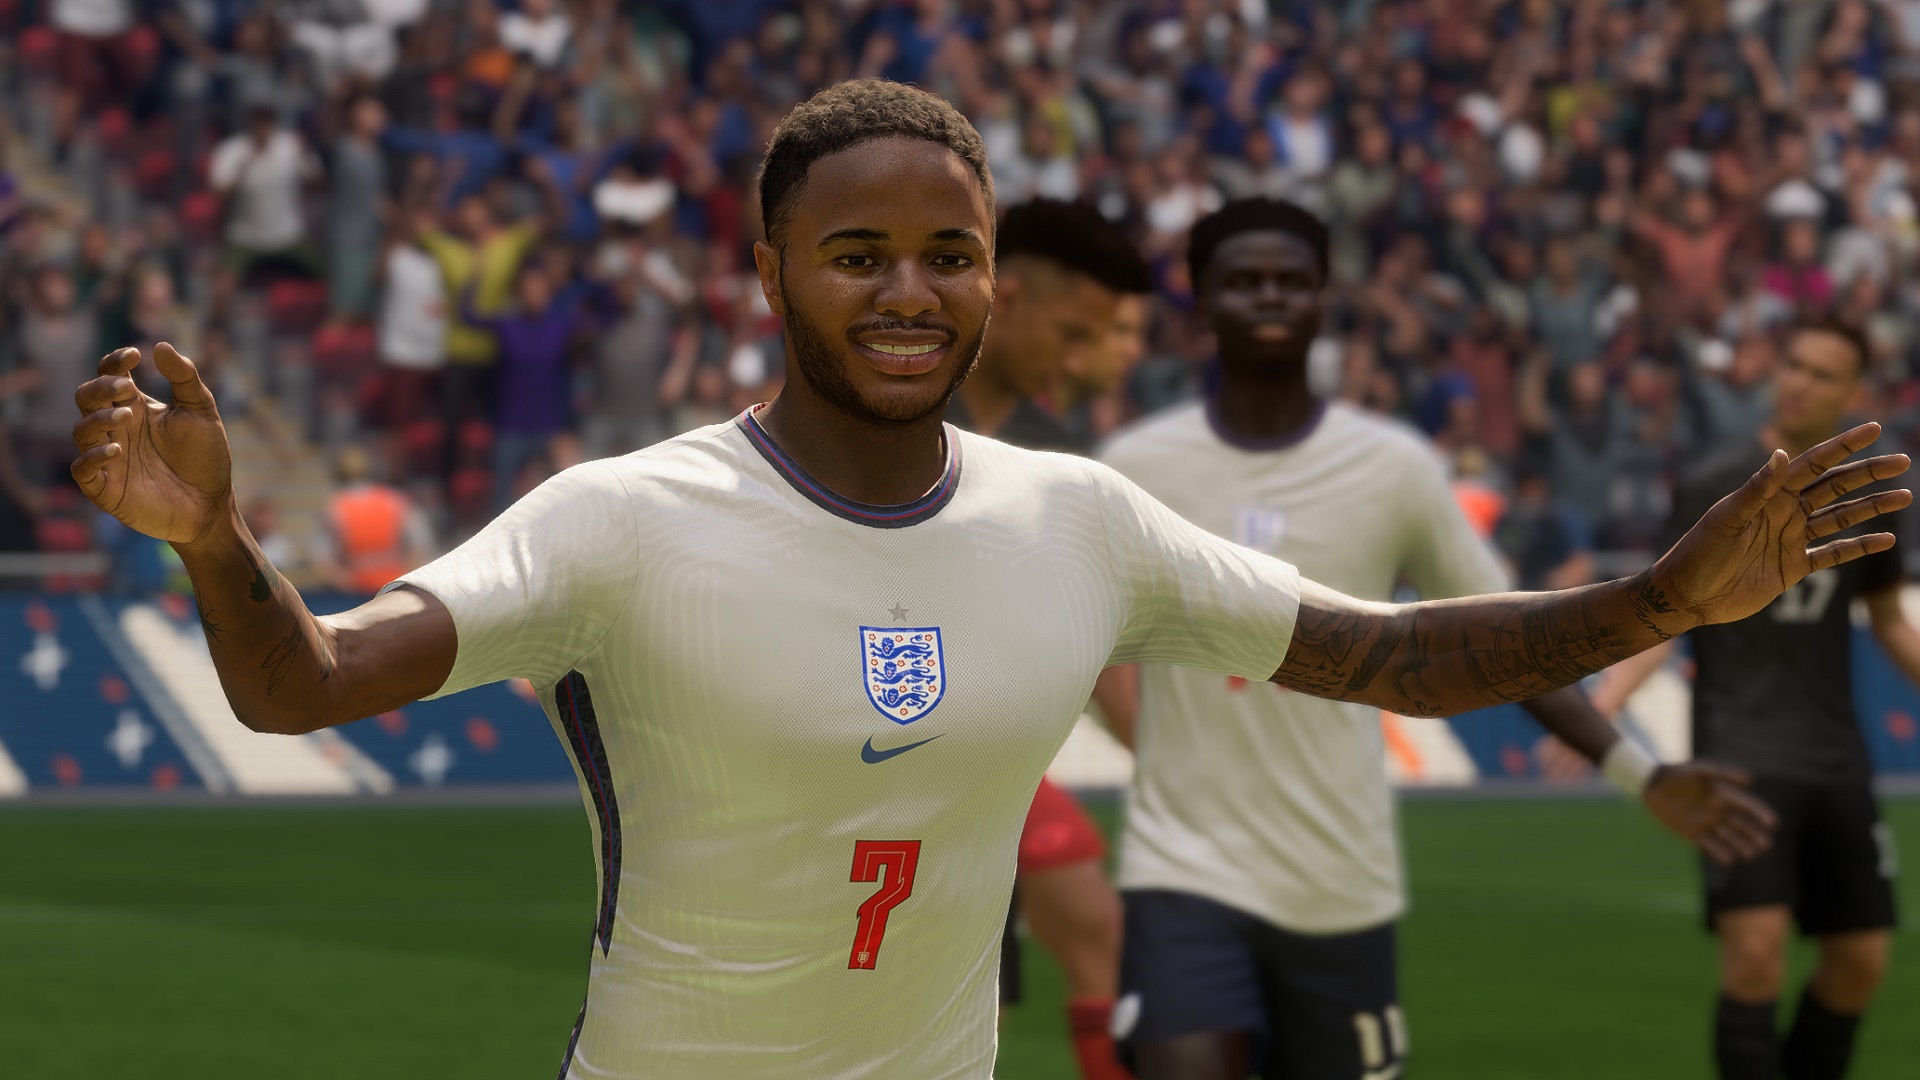 FIFA 23 World Cup mode release date, teams, and FUT content